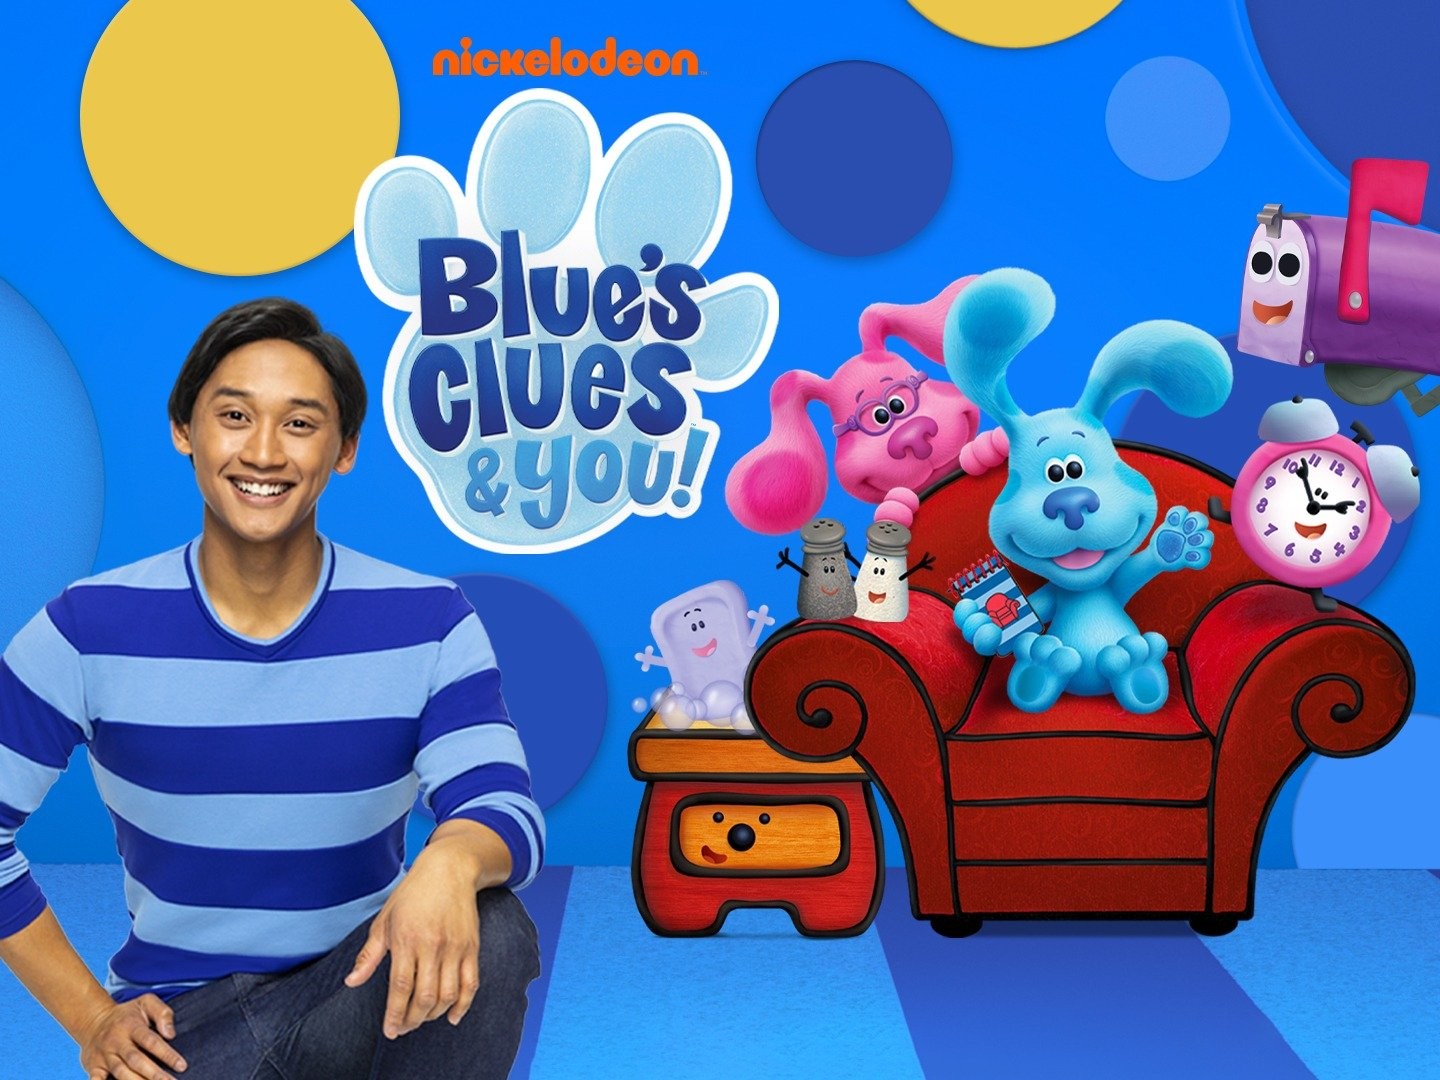 Blue's Clues Hosts Steve And Joe Are Returning For The New Season Premiere